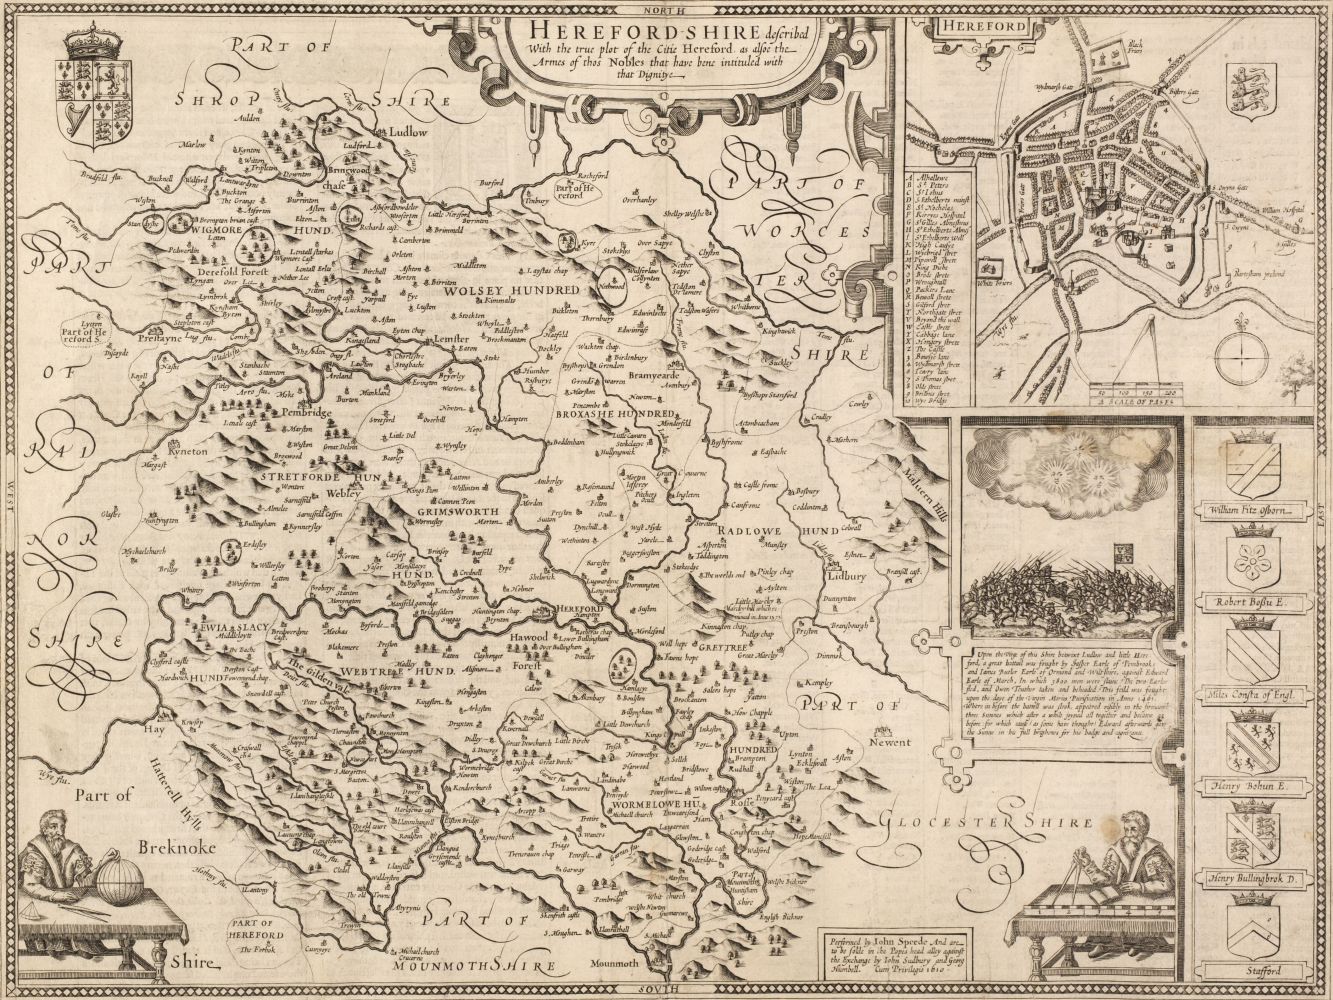 Maps. A collection of approximately 100 British maps, 17th - 19th century